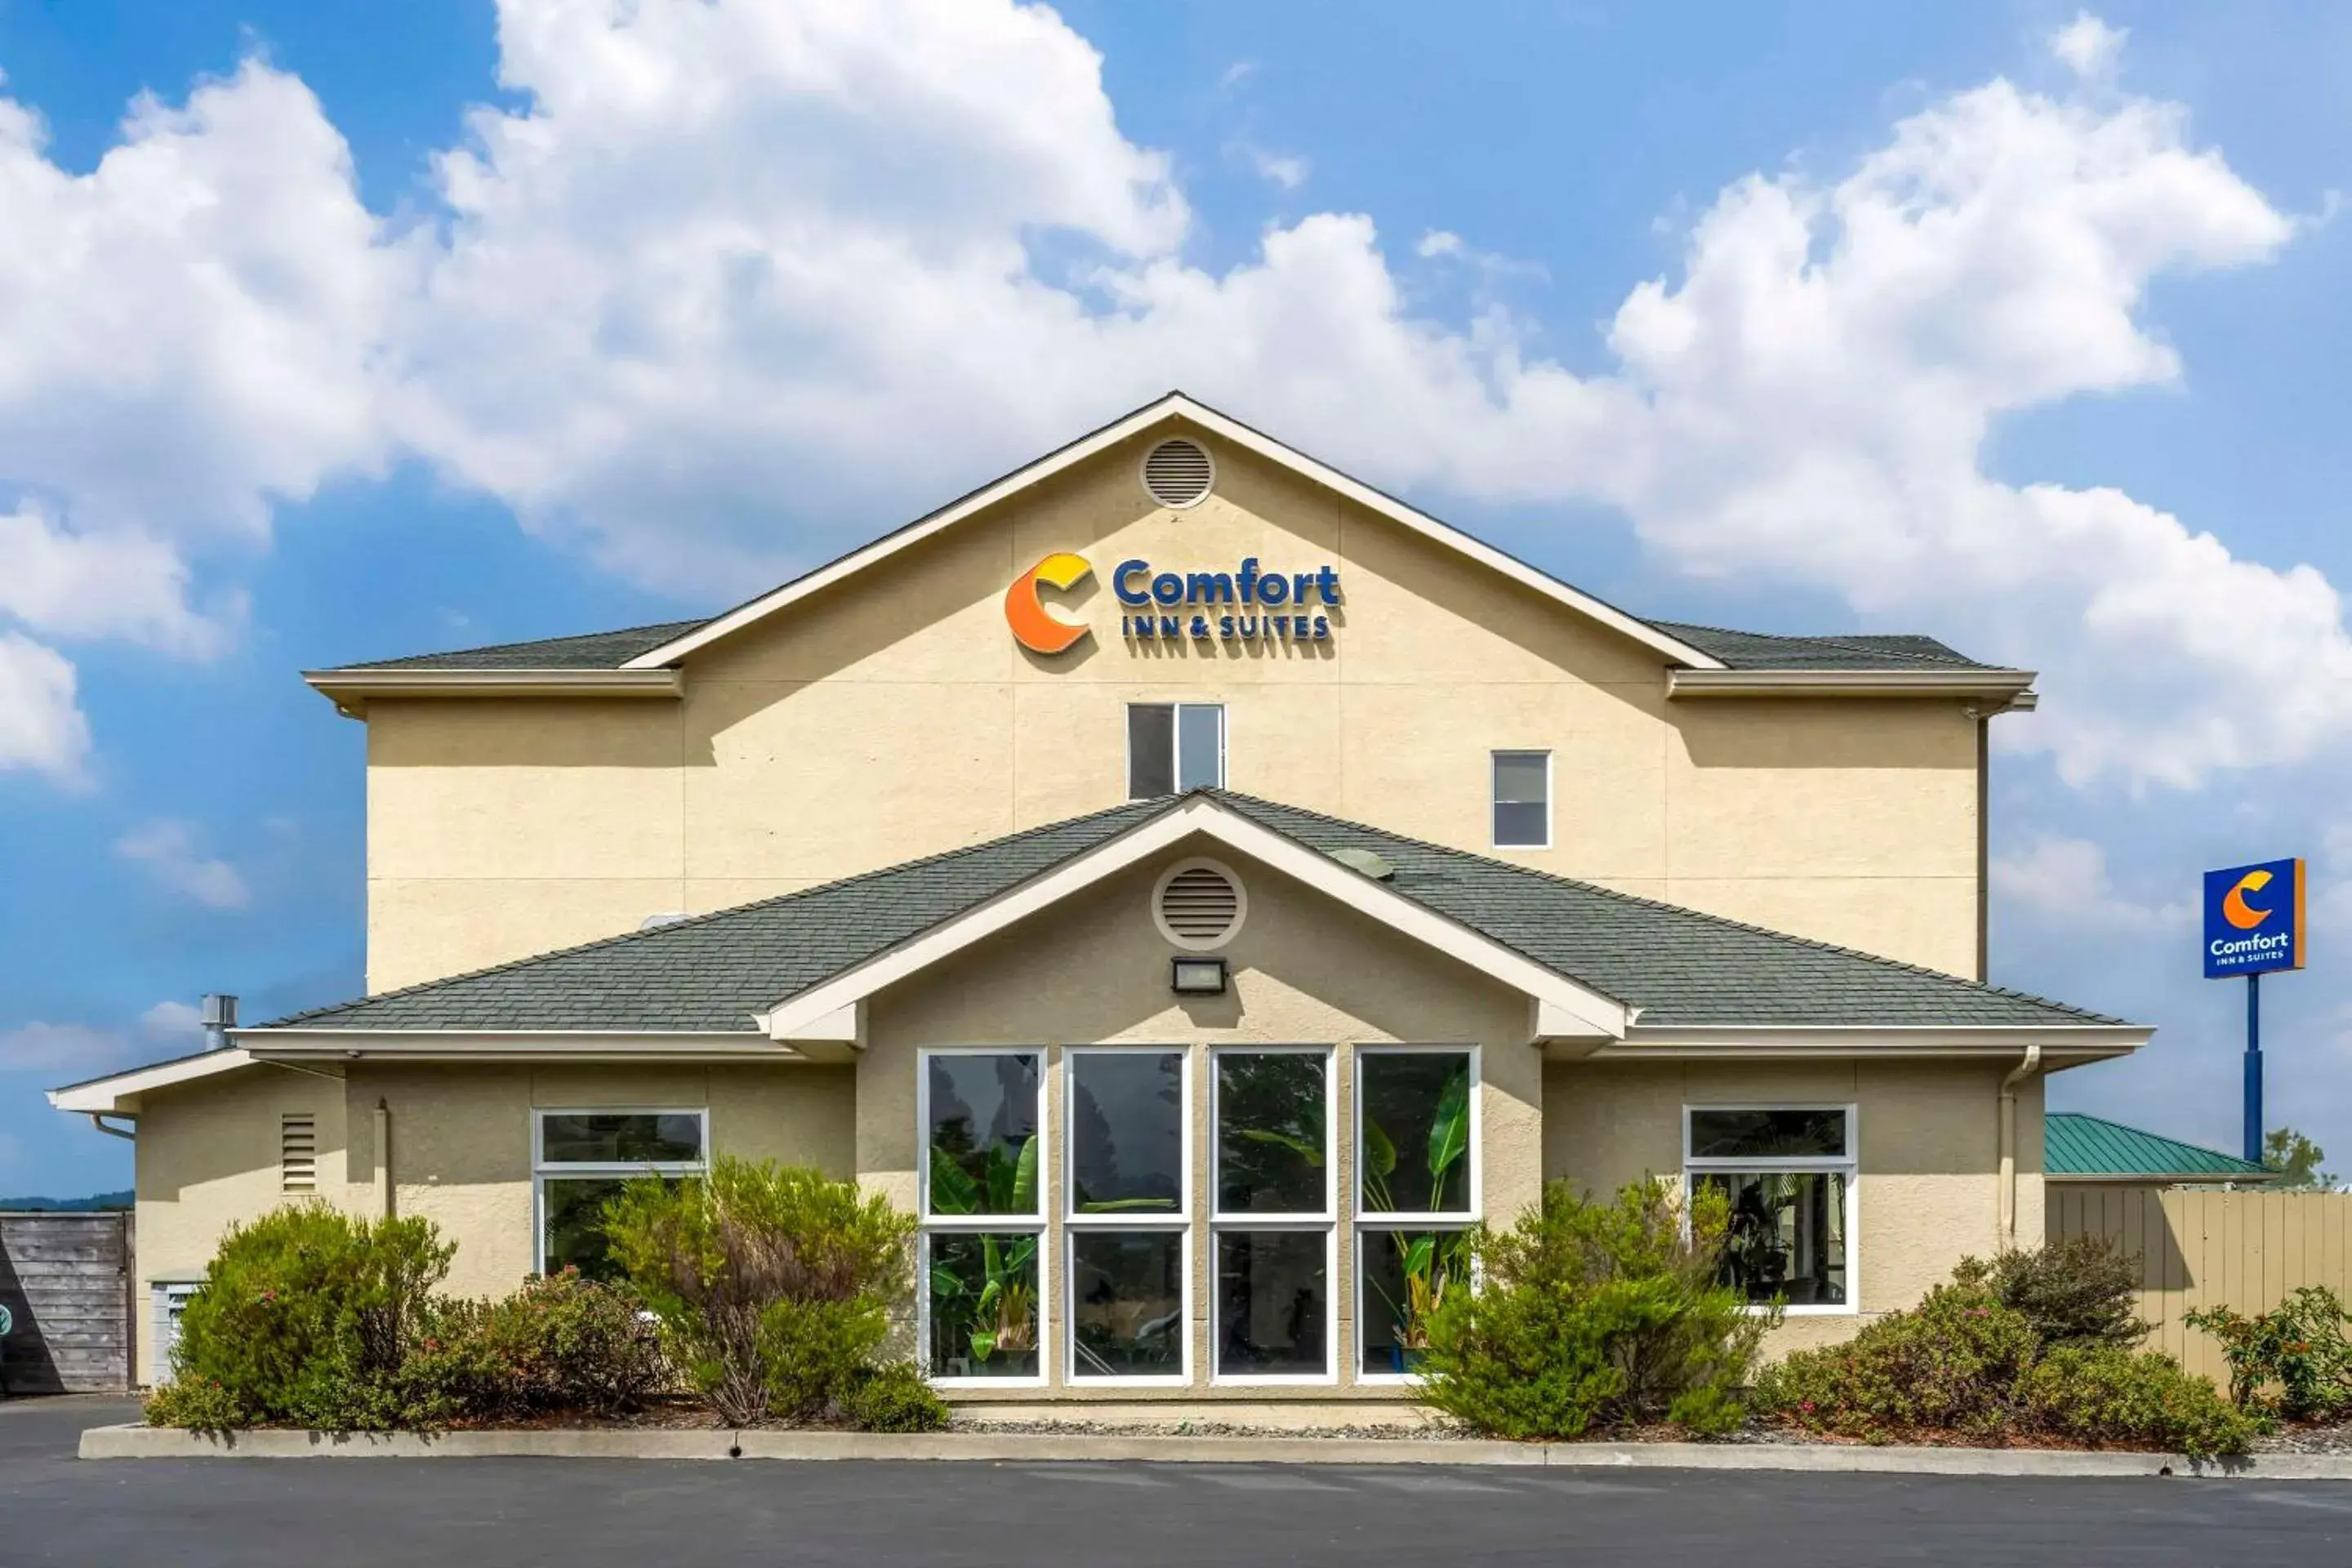 Property Building in Comfort Inn & Suites Redwood Country